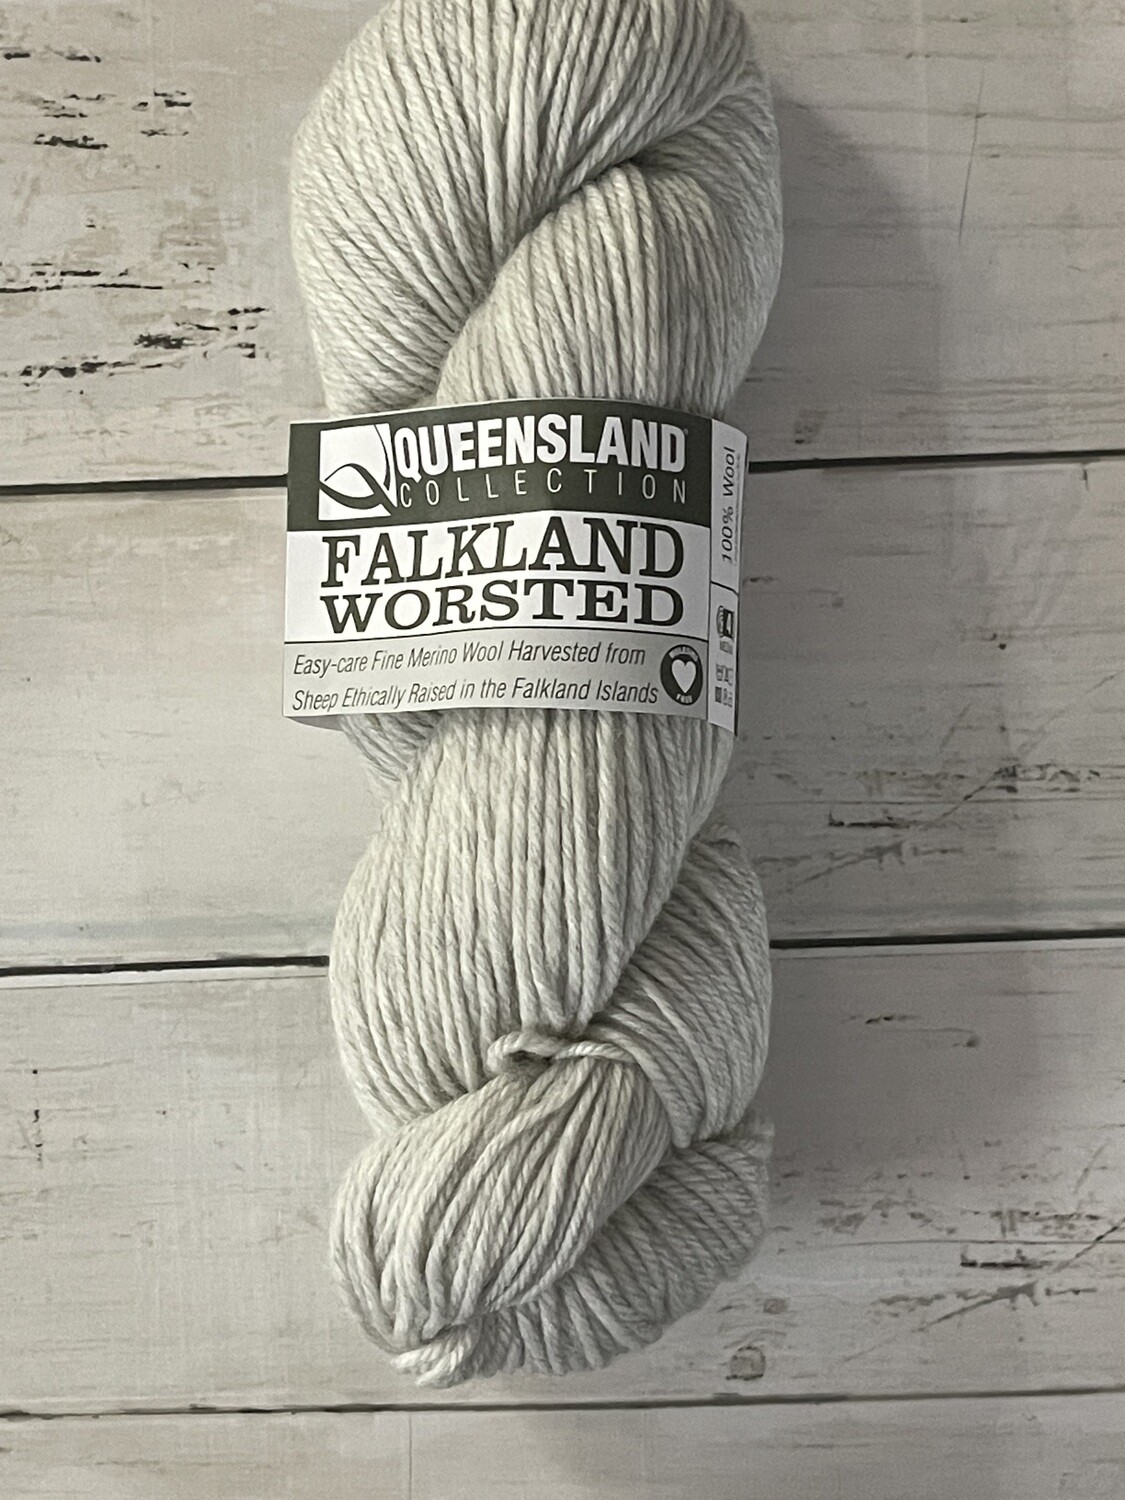 Queensland Collection - Falkland Worsted